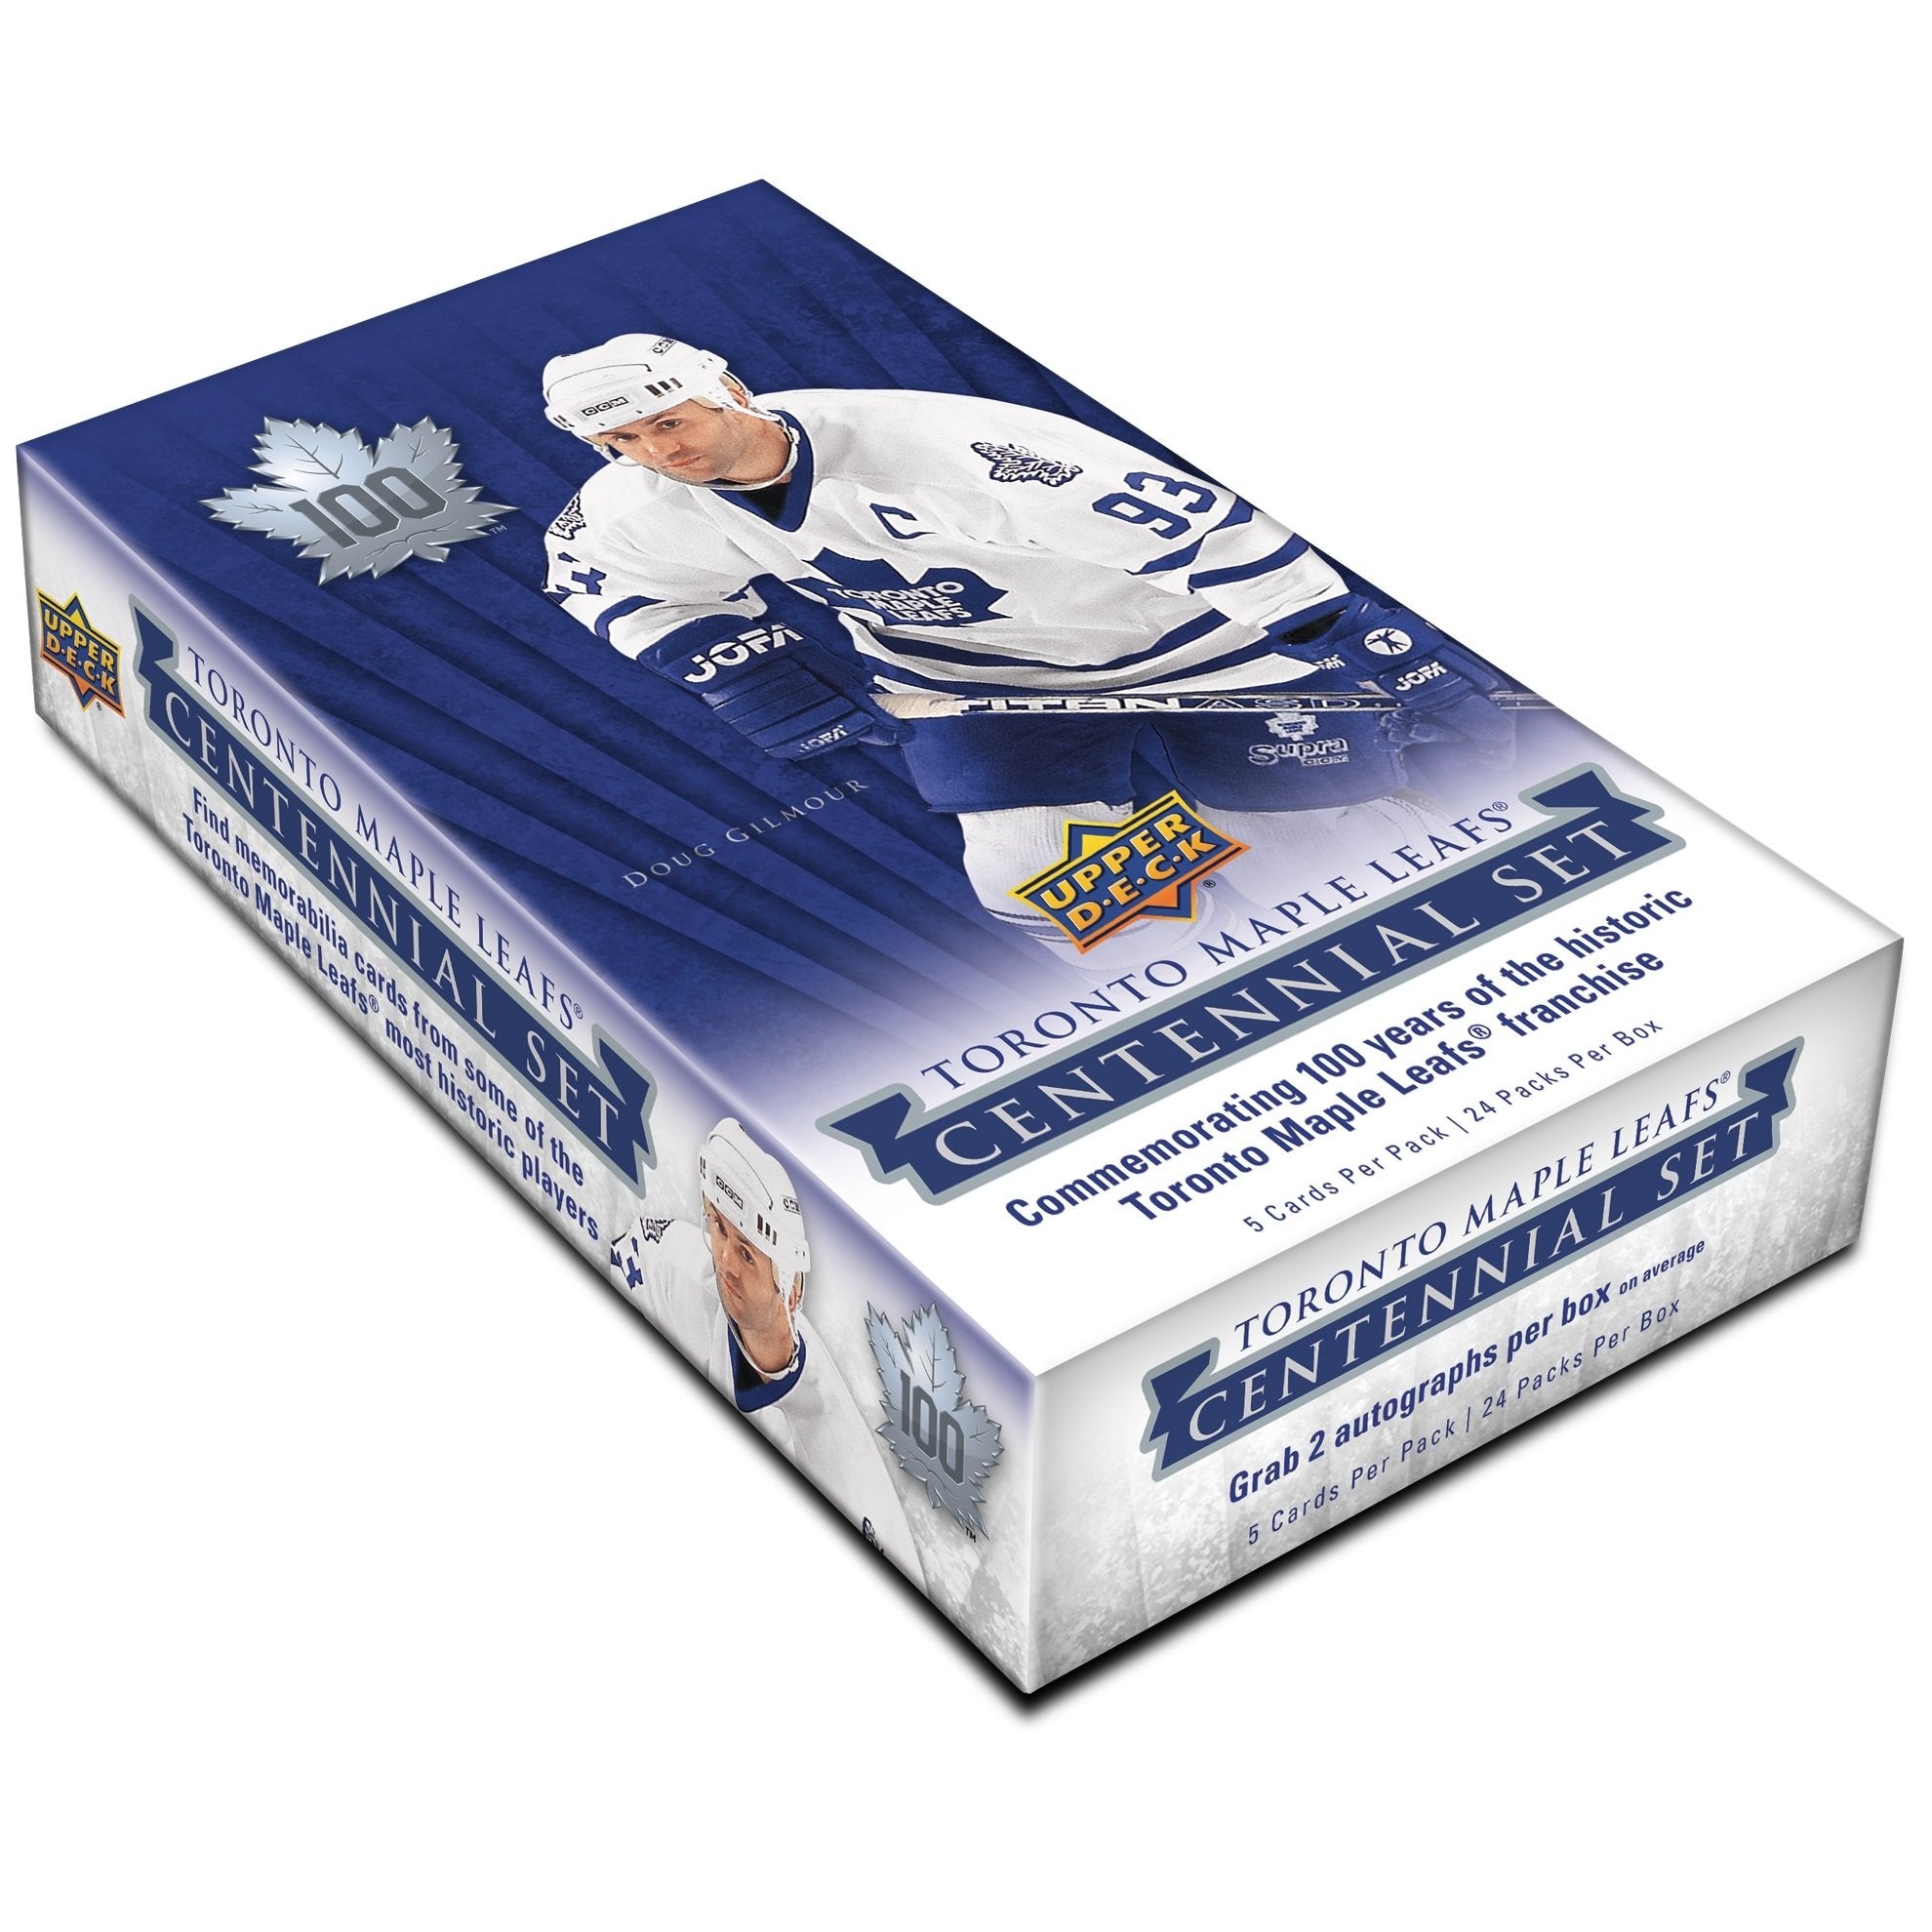 2017-18 Upper Deck Toronto Maple Leafs Centennial Sealed Hockey Hobby Case (Boxes of 12) - BigBoi Cards